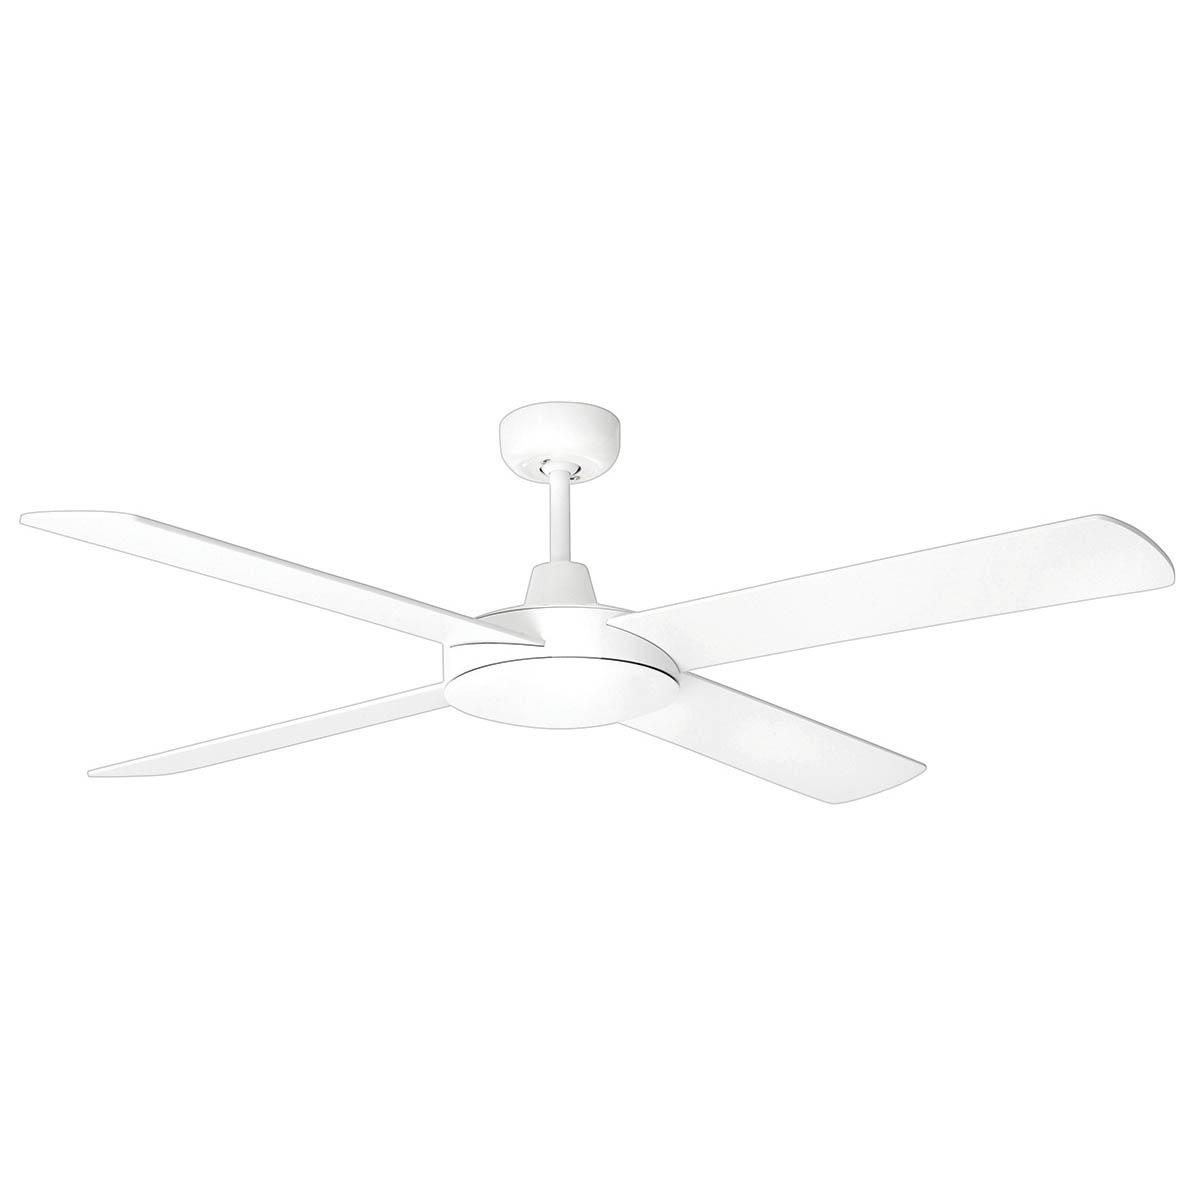 TEMPEST DC 52" CEILING FAN - WHITE WITH WHITE BLADES